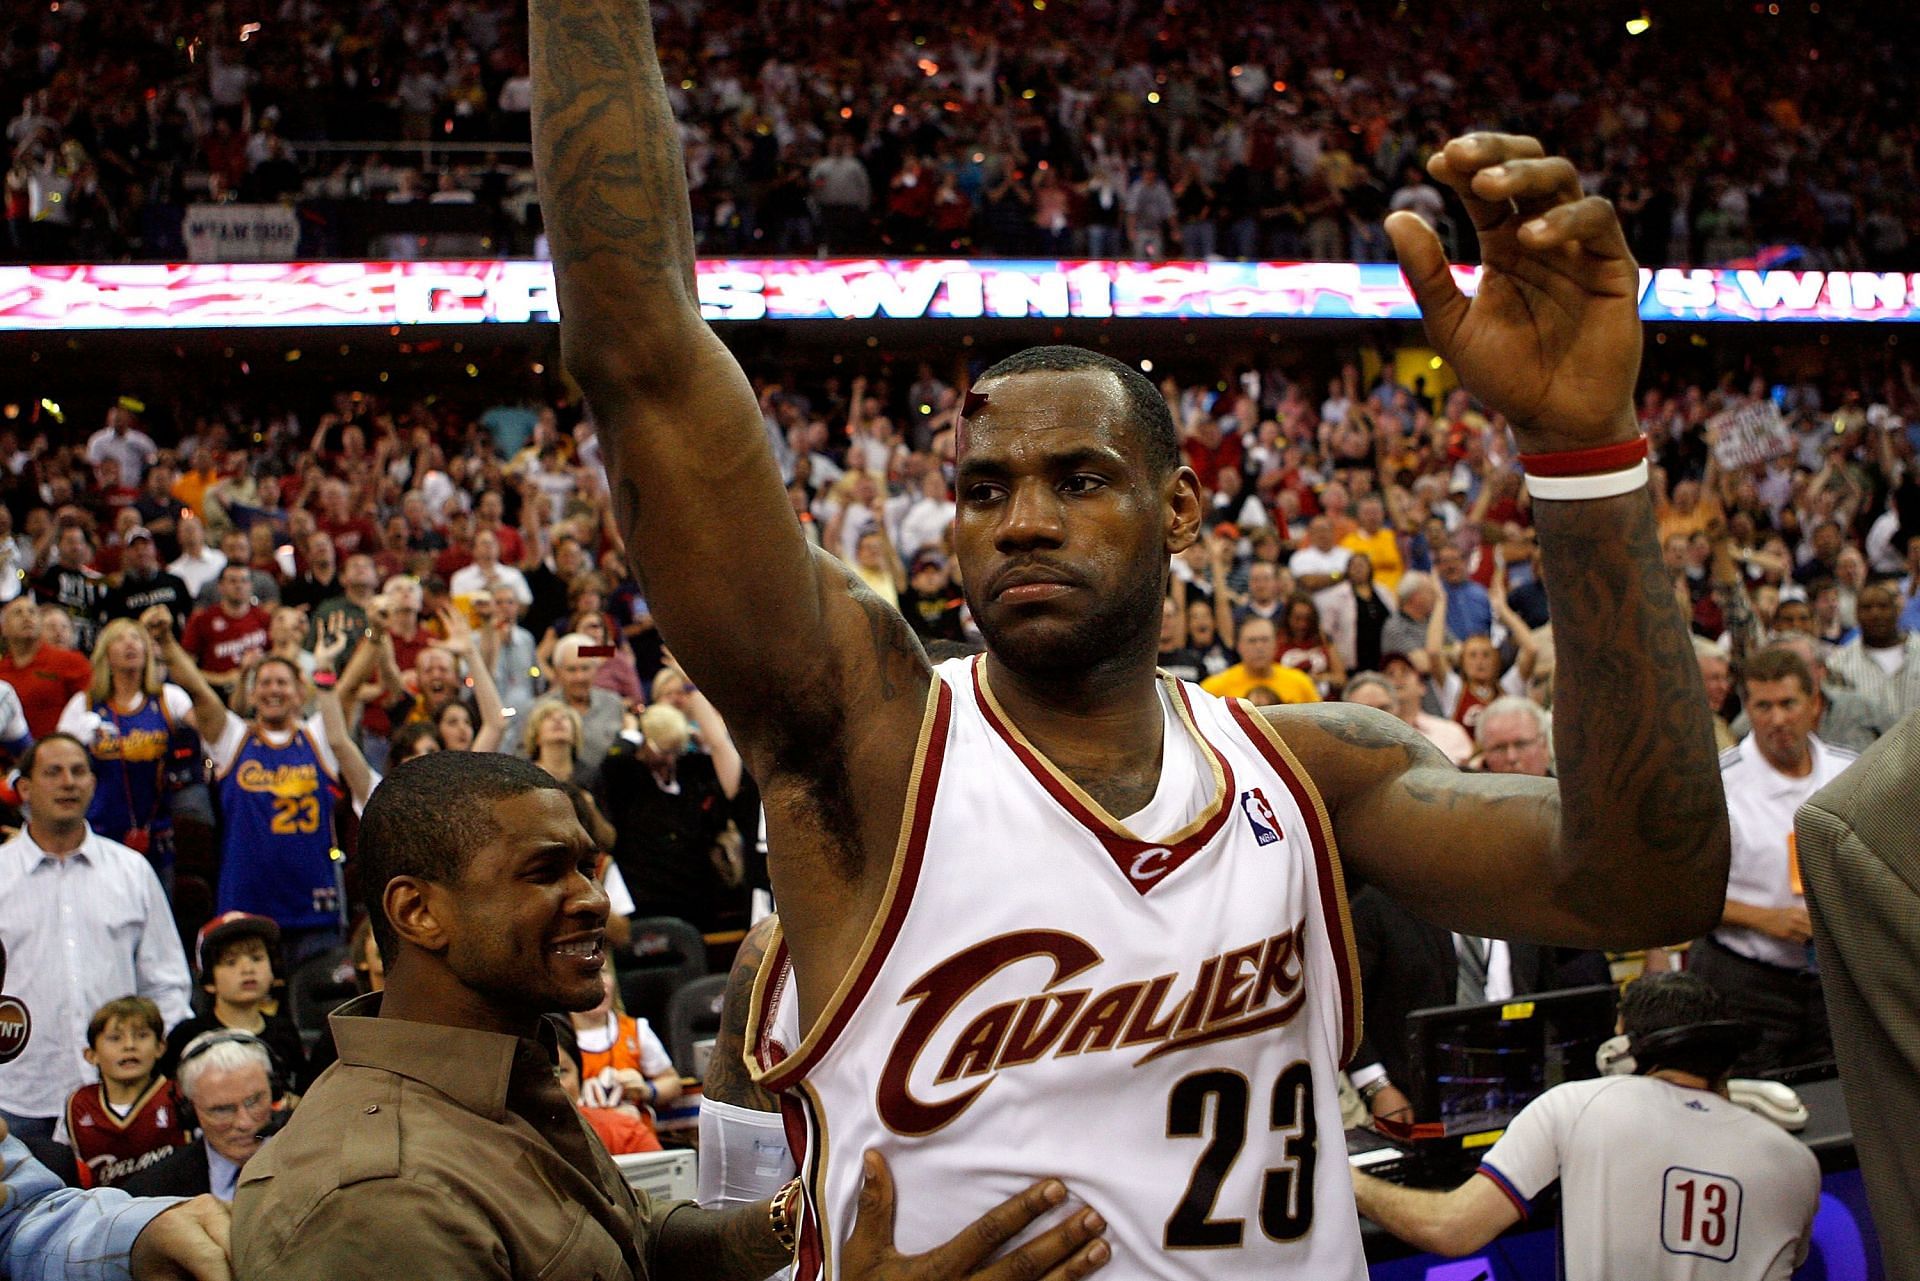 LeBron James after his buzzer beater against the Orlando Magic.